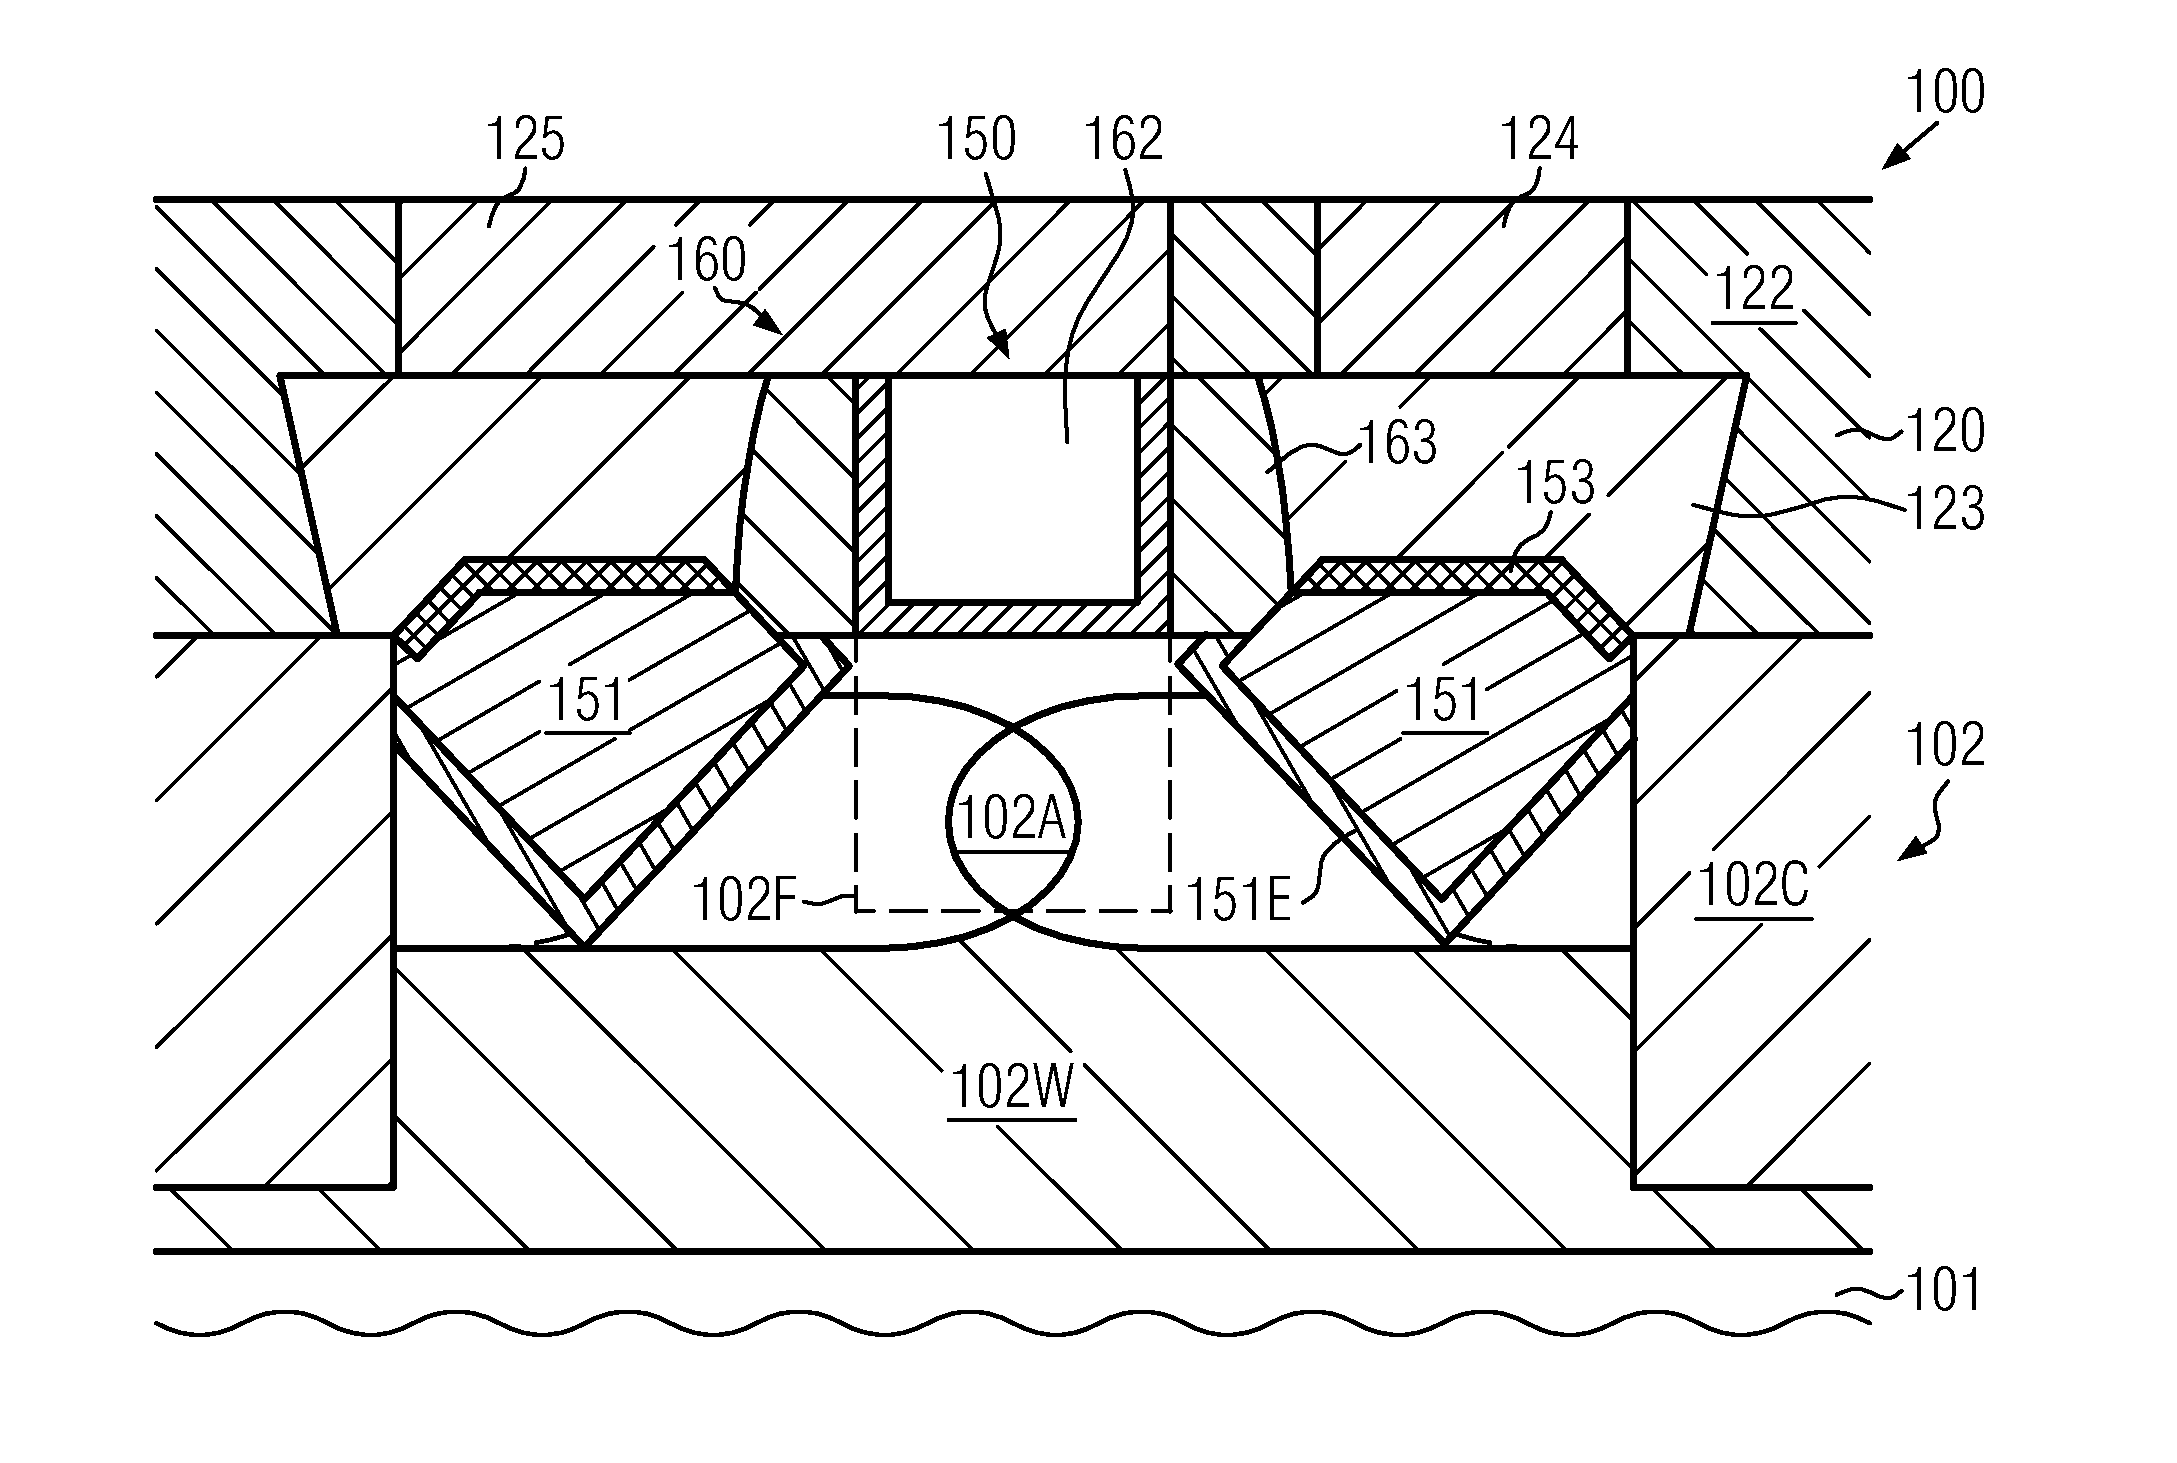 Self-aligned fin transistor formed on a bulk substrate by late fin etch